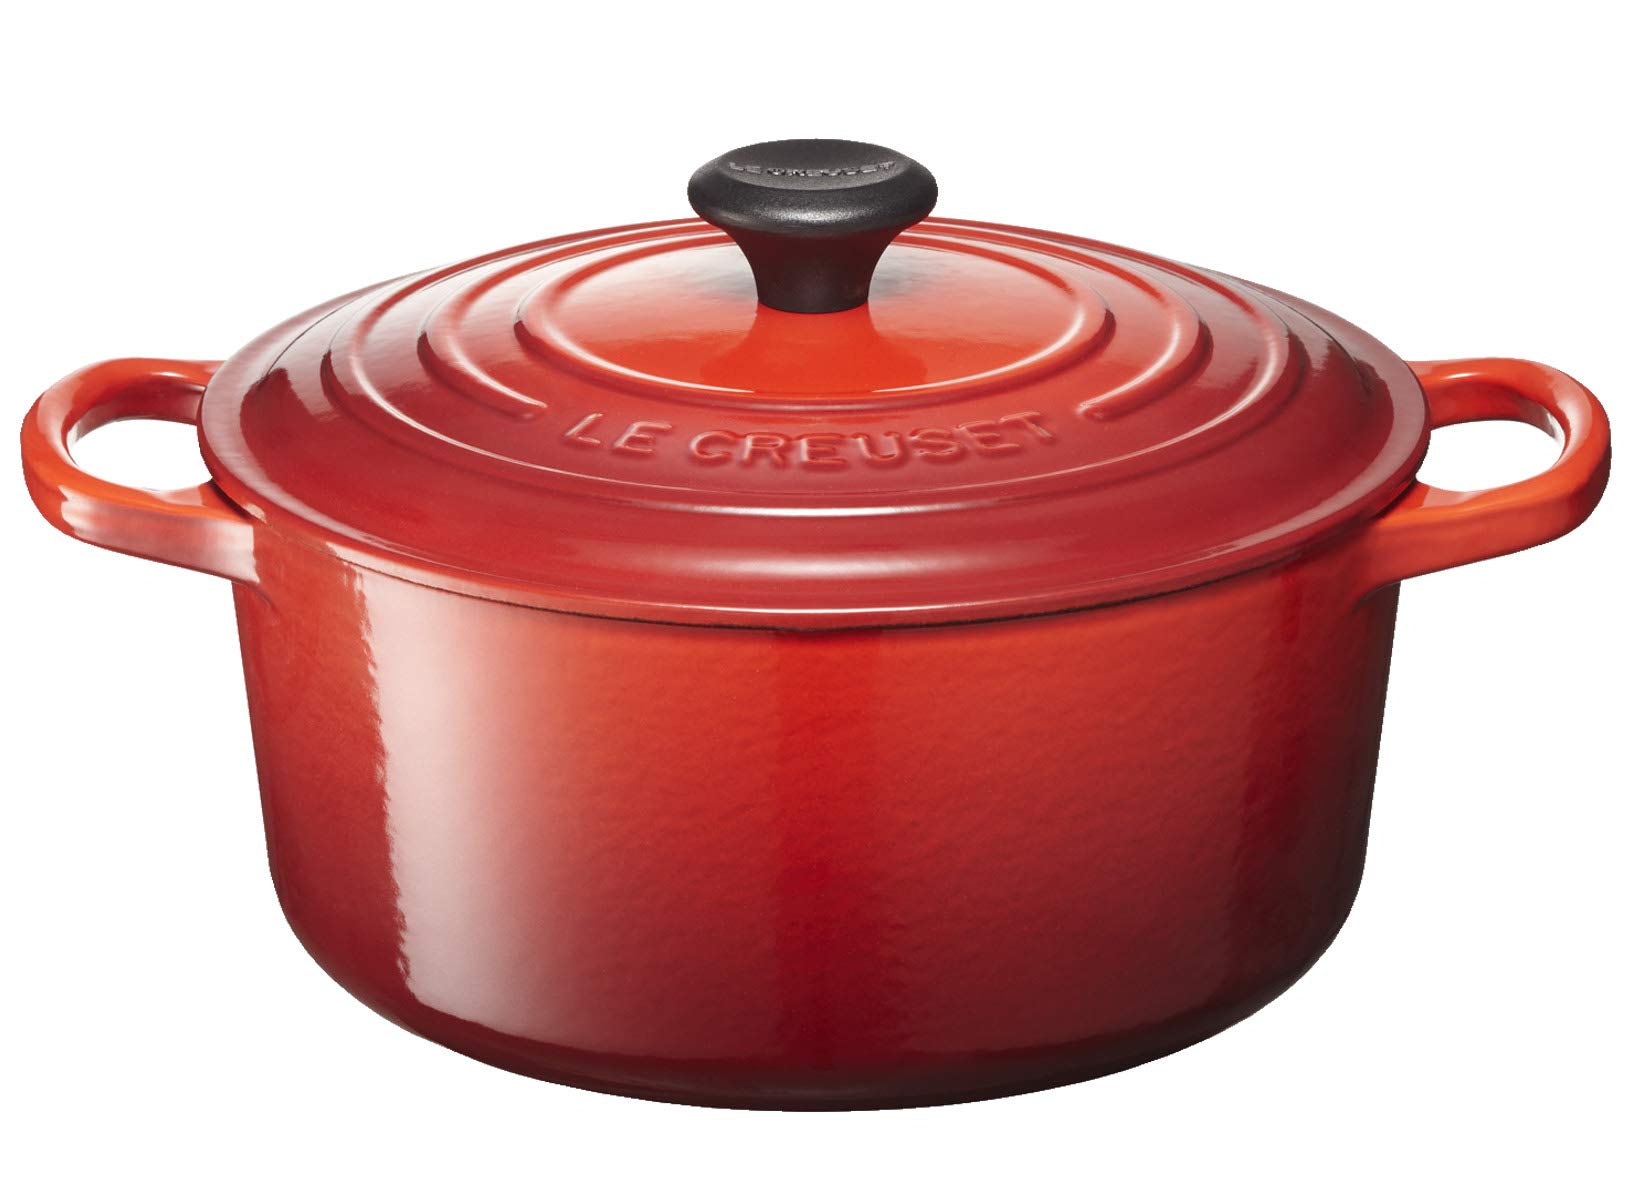 Can Le Creuset Go in Oven: Oven-Ready Elegance - Clarifying Le Creuset's Oven Compatibility